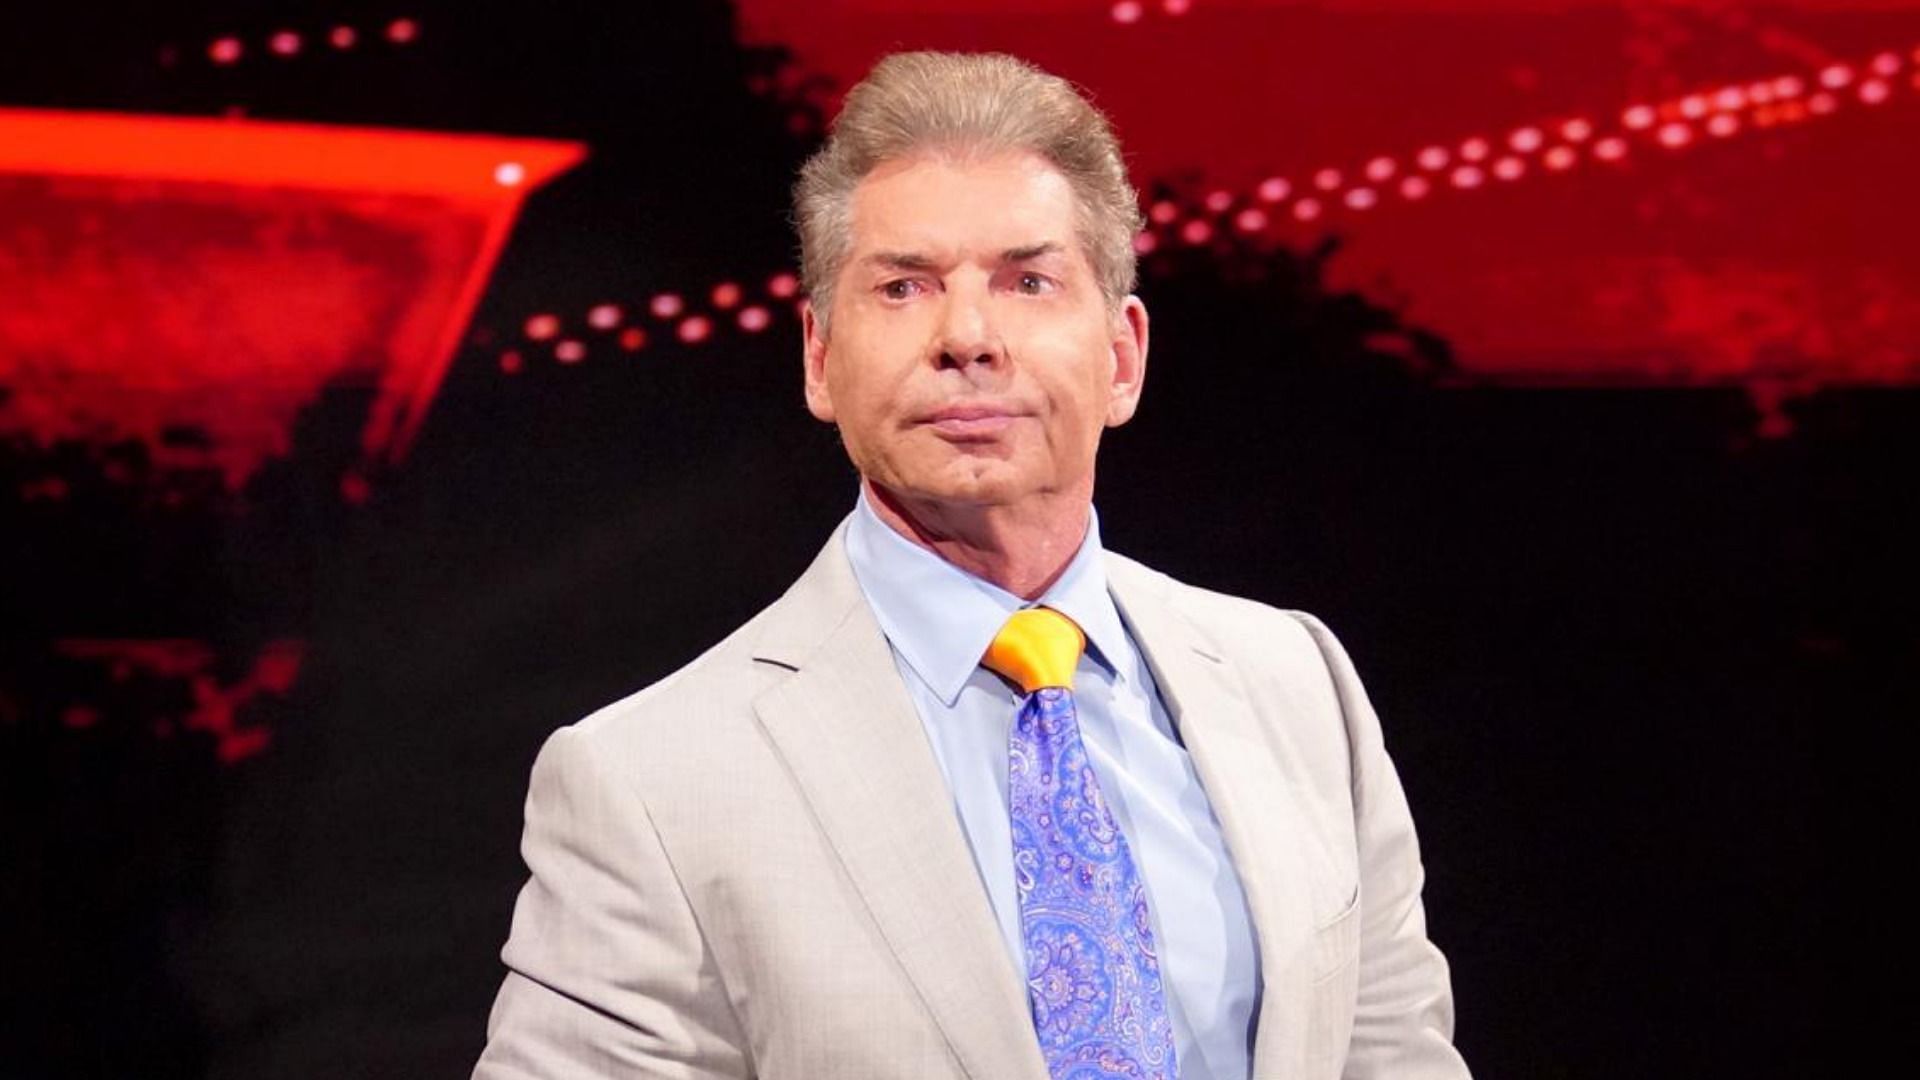 WWE Chairman Vince McMahon is once again under scrutiny